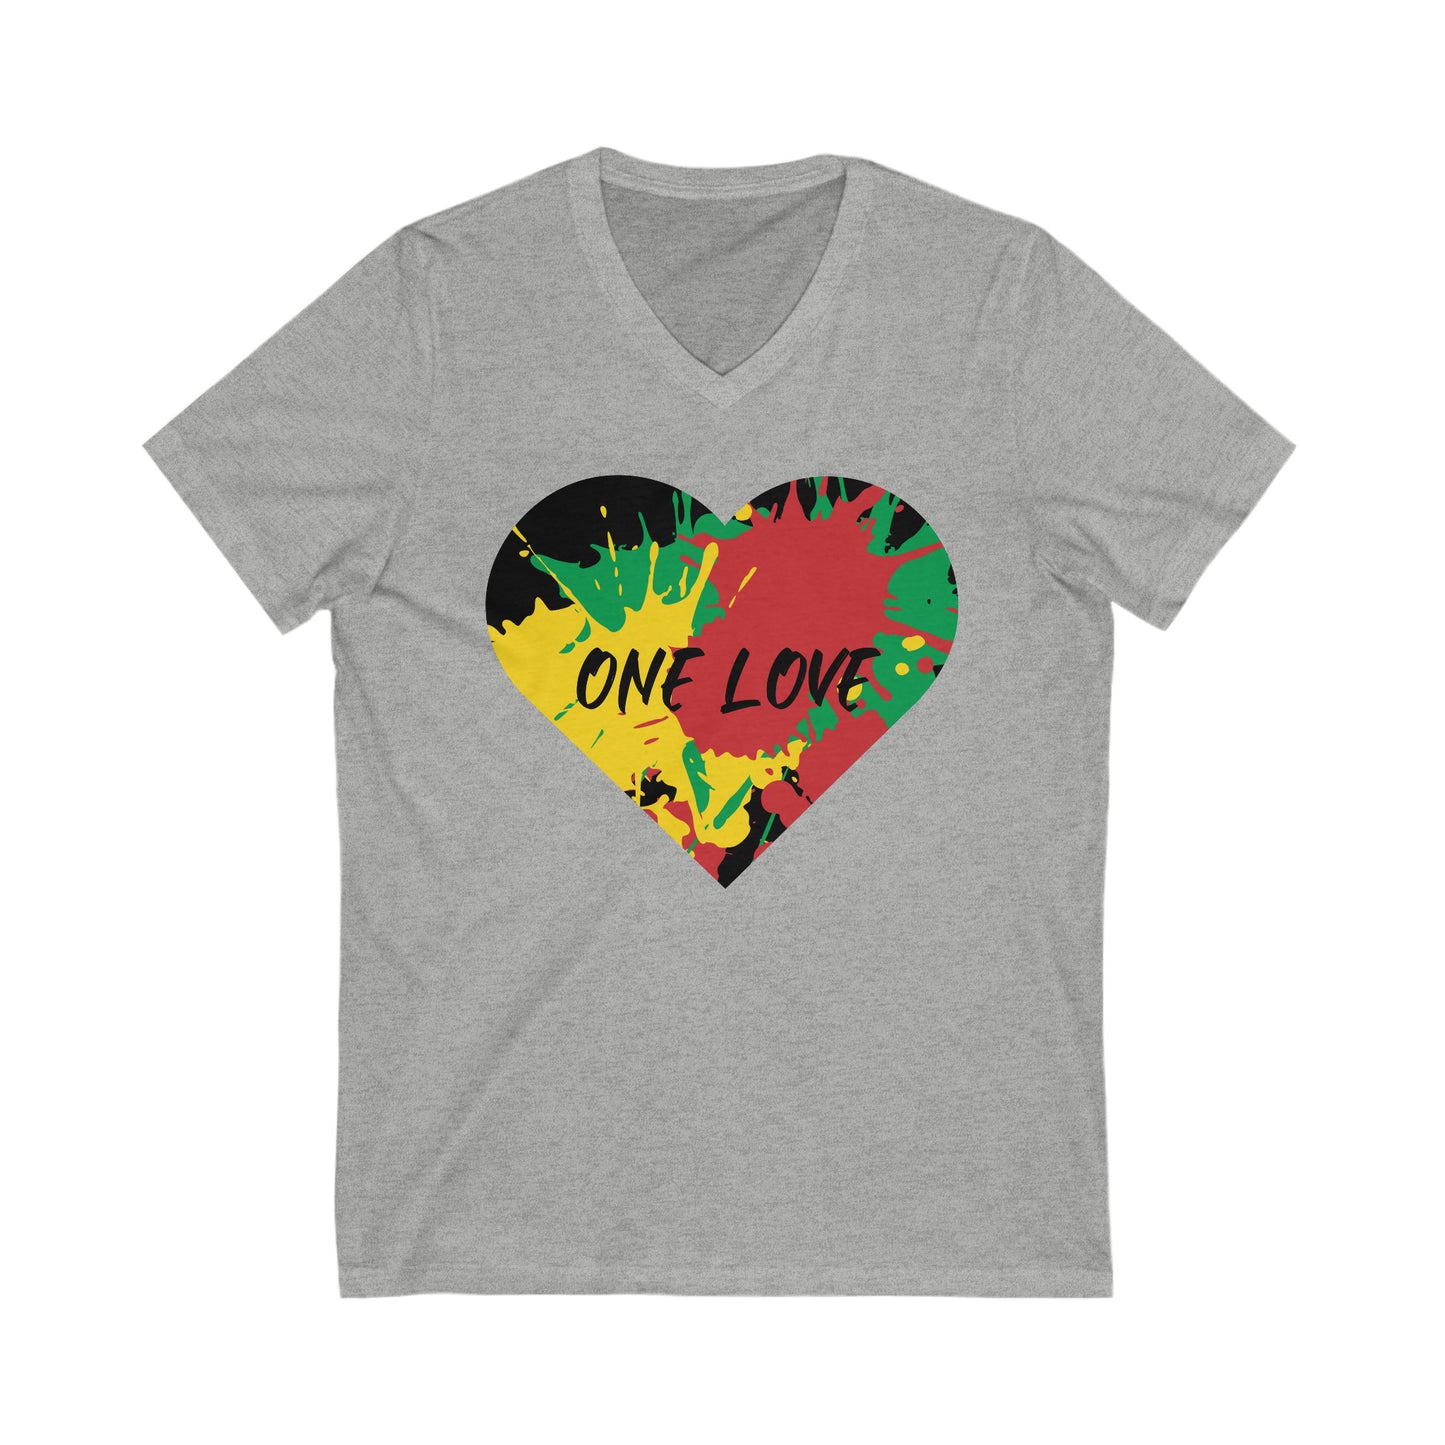 ONE LOVE RED GREEN AND GOLD HEART V NECK T SHIRT